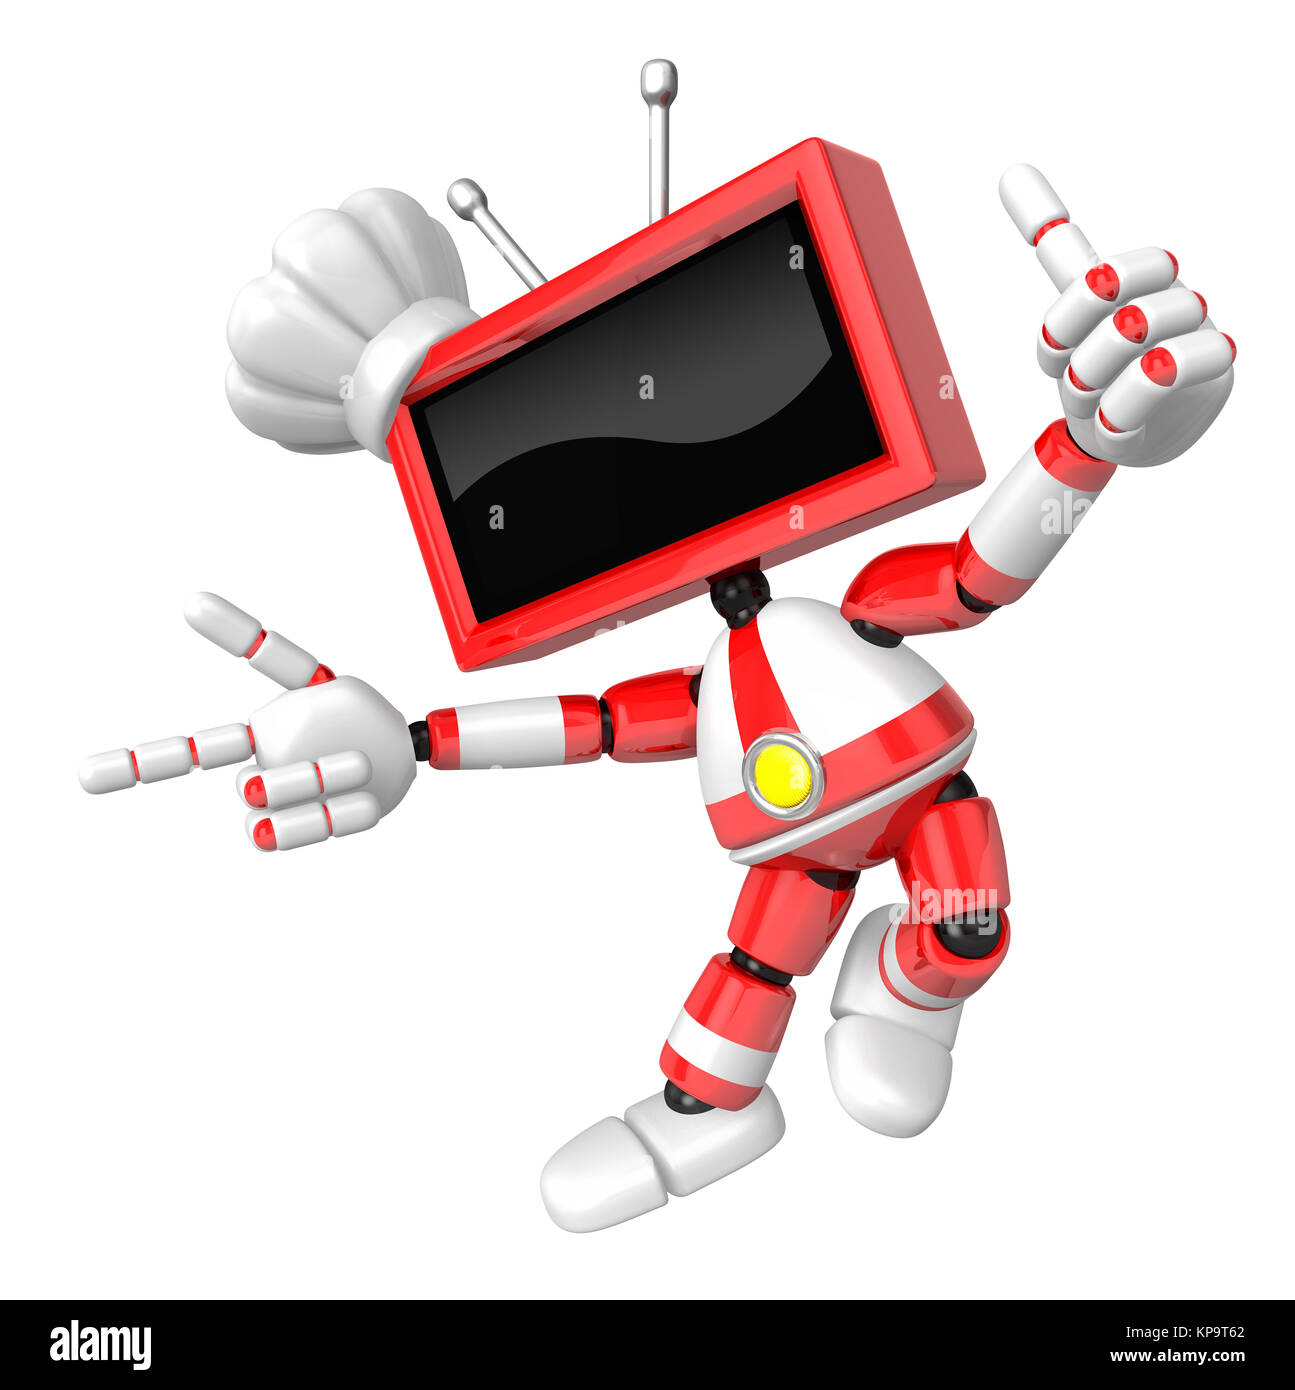 Red TV character are kindly guidance. Create 3D Television Robot Series. Stock Photo